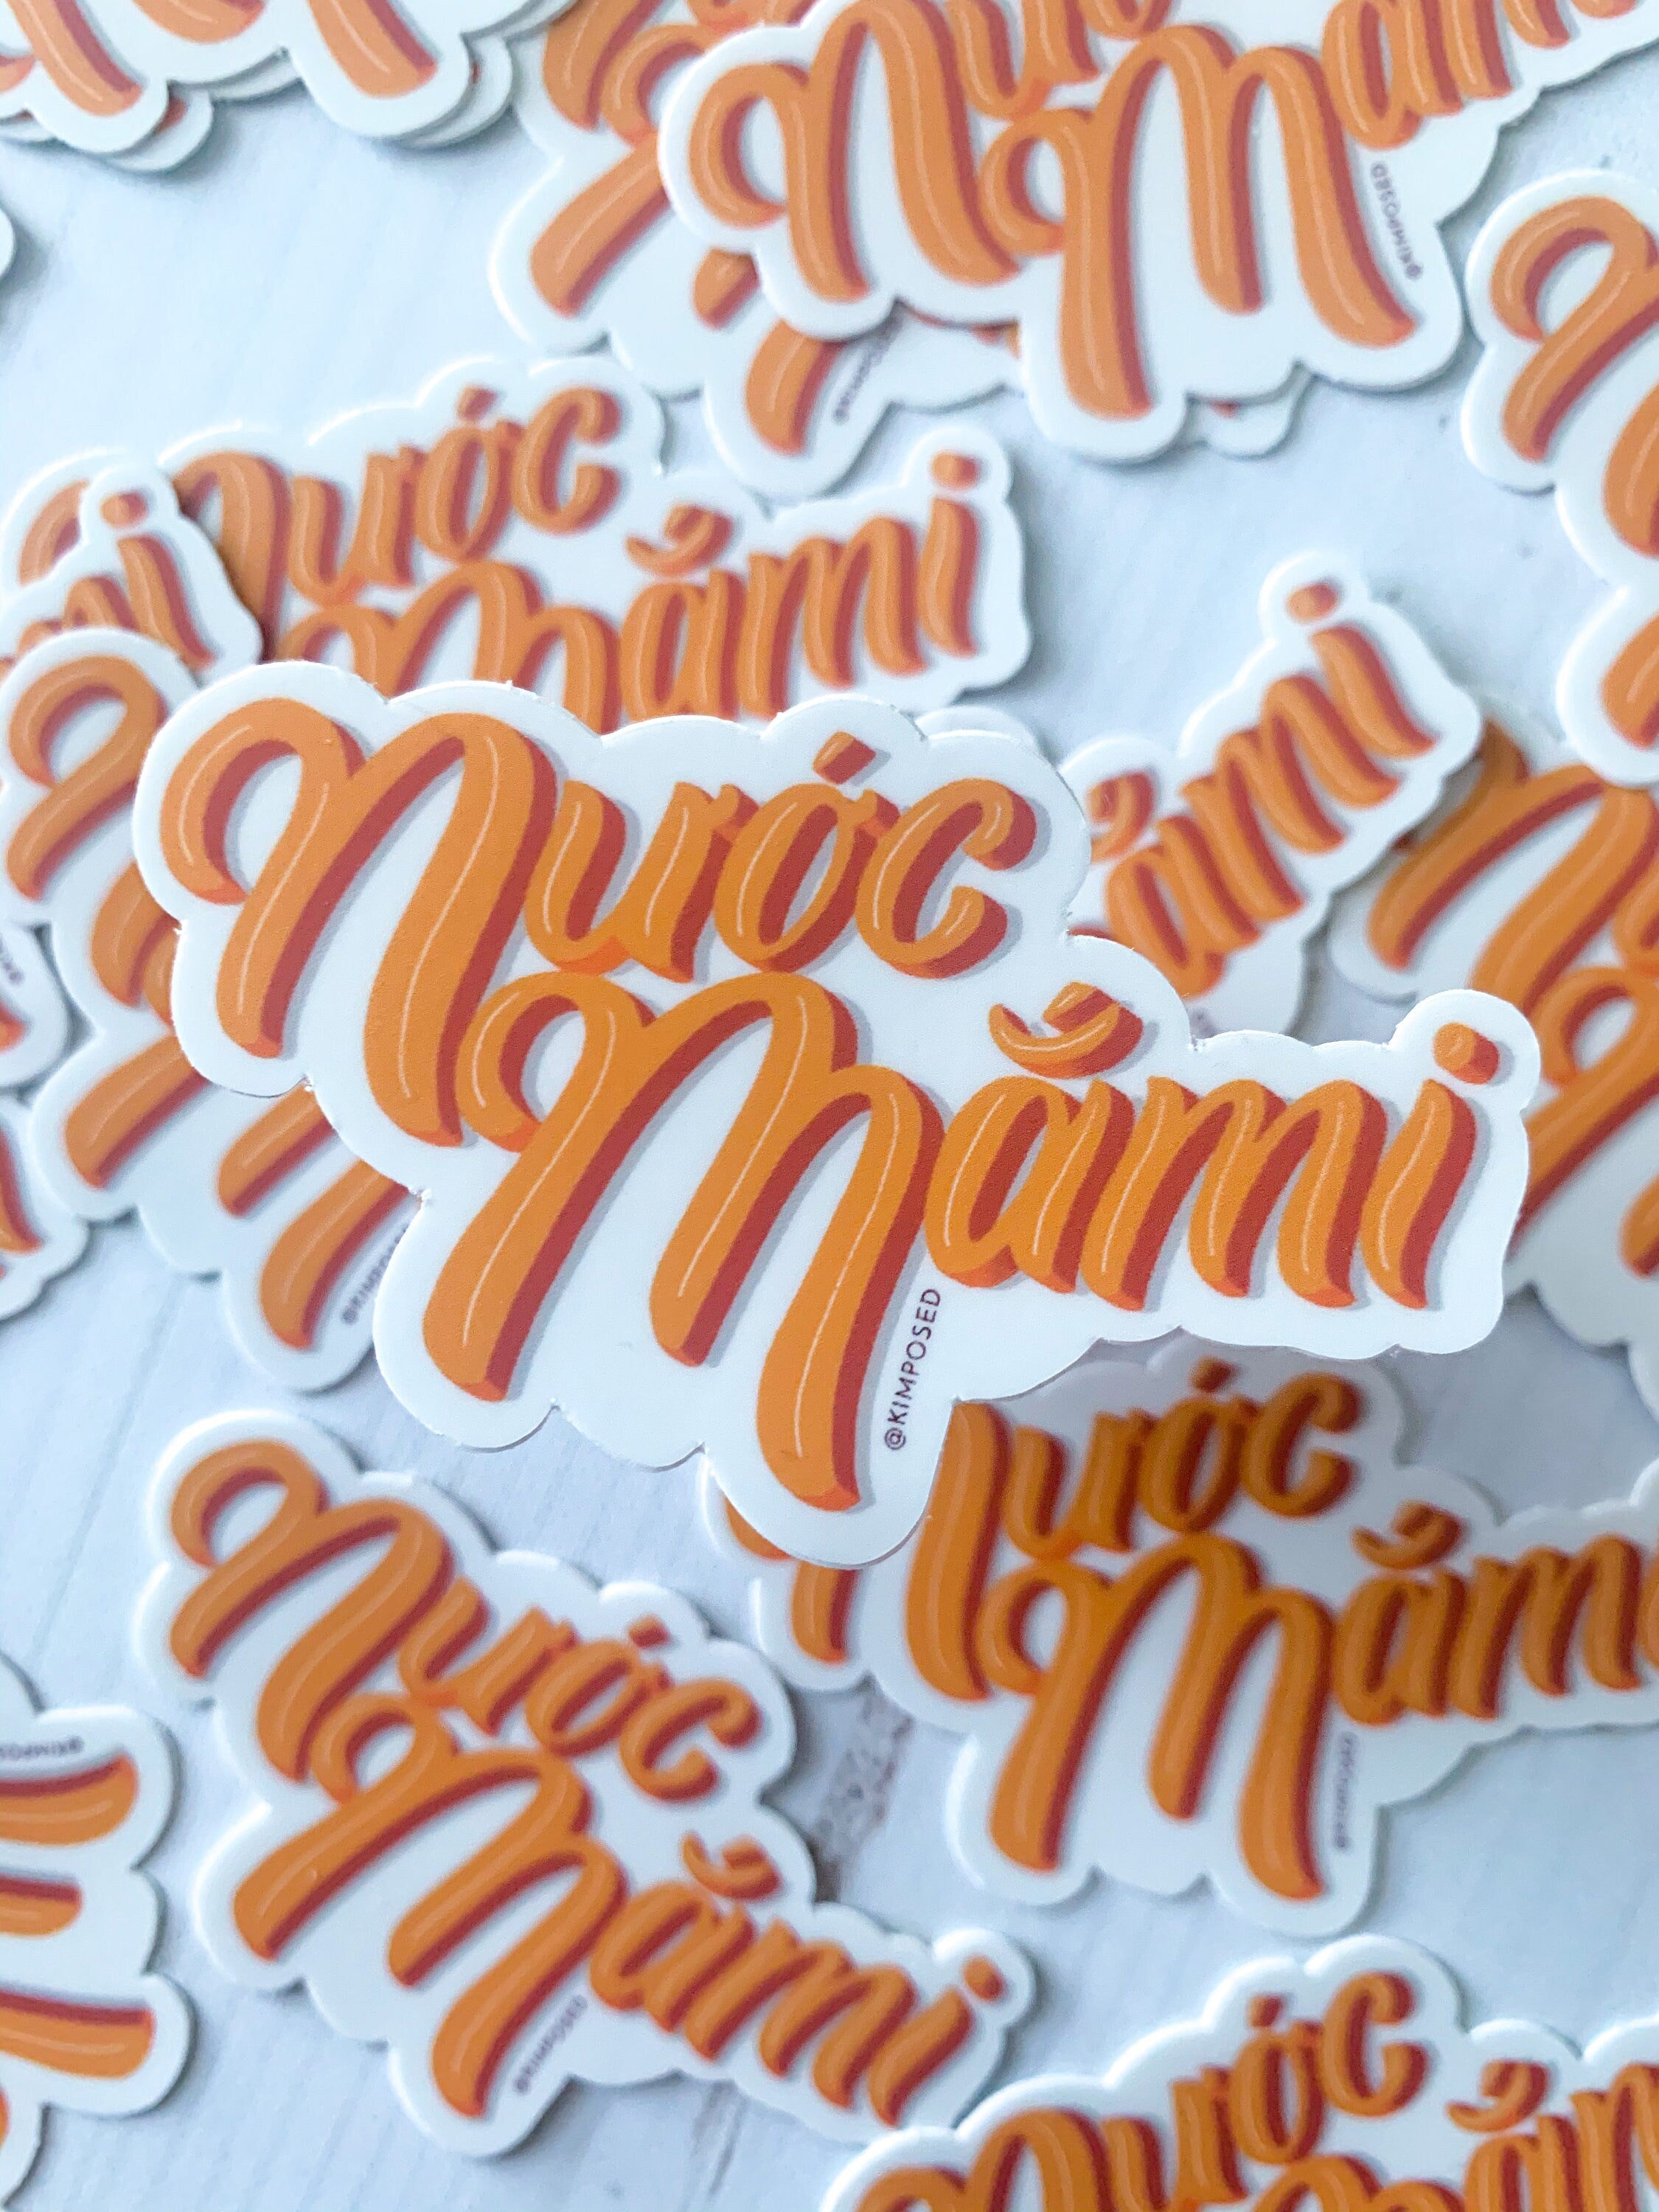 Nuoc Mami 3" Waterproof Vinyl Sticker for Water Bottles, Laptops, Phones & More **FREE USA SHIPPING**